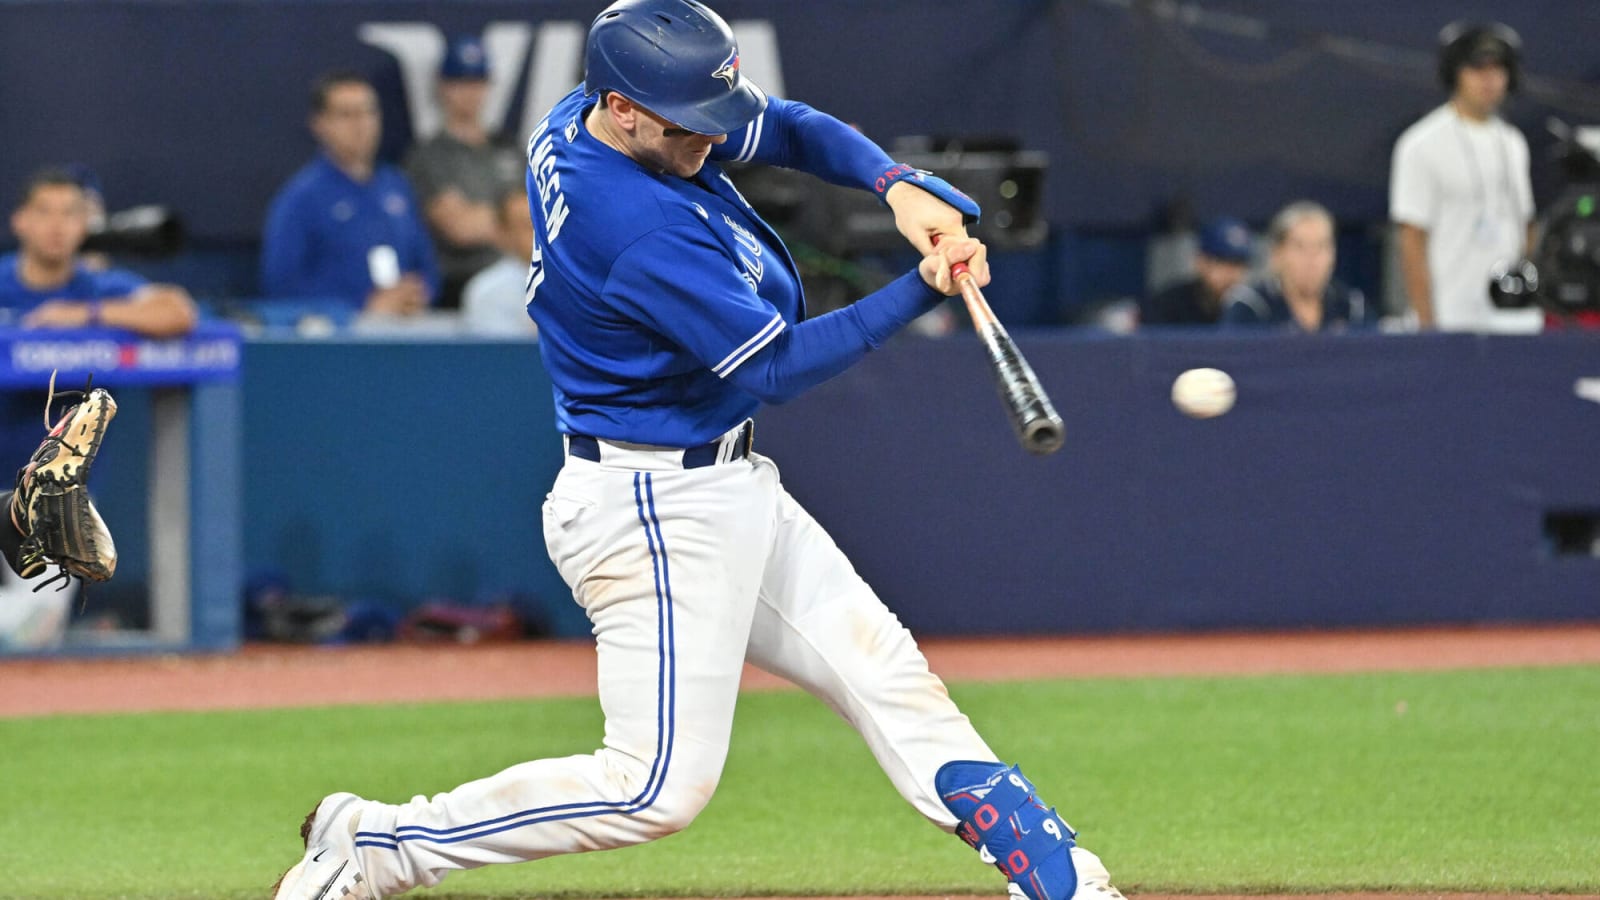 Danny Jansen on signing an extension with the Blue Jays: 'Both parties agreed to carry on and see what happens throughout this year'